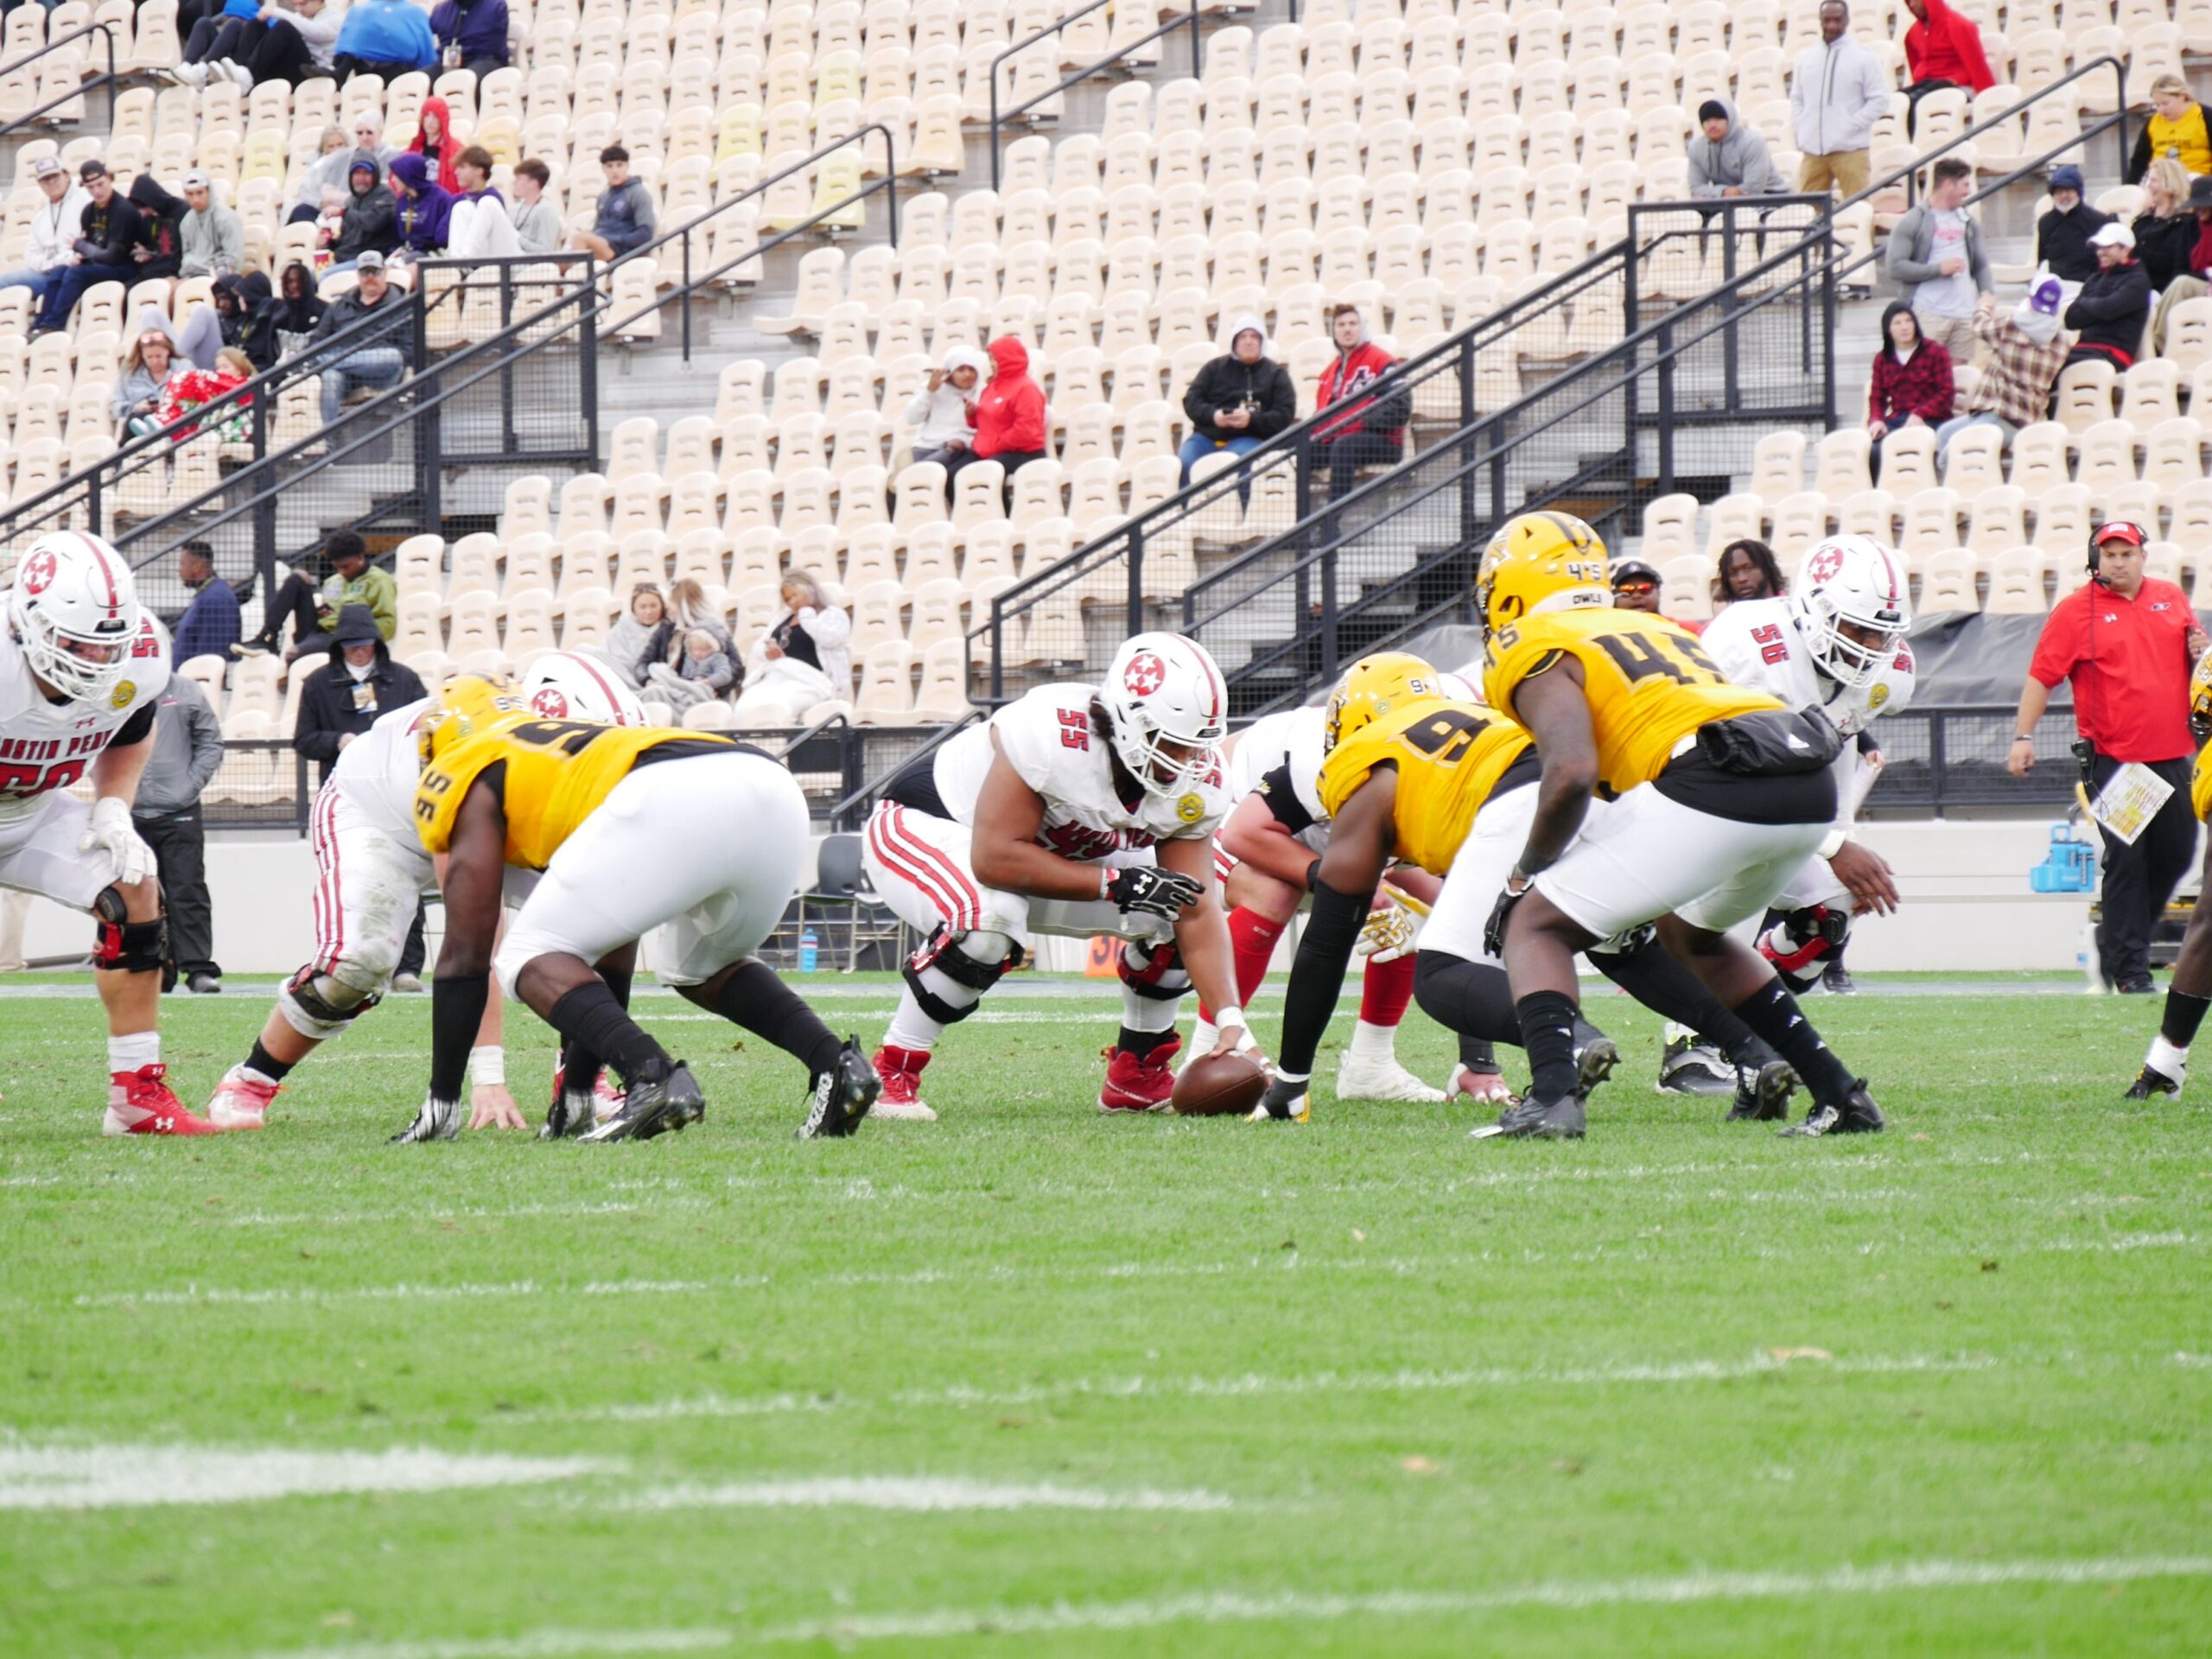 Football falls to Austin Peay in final home game